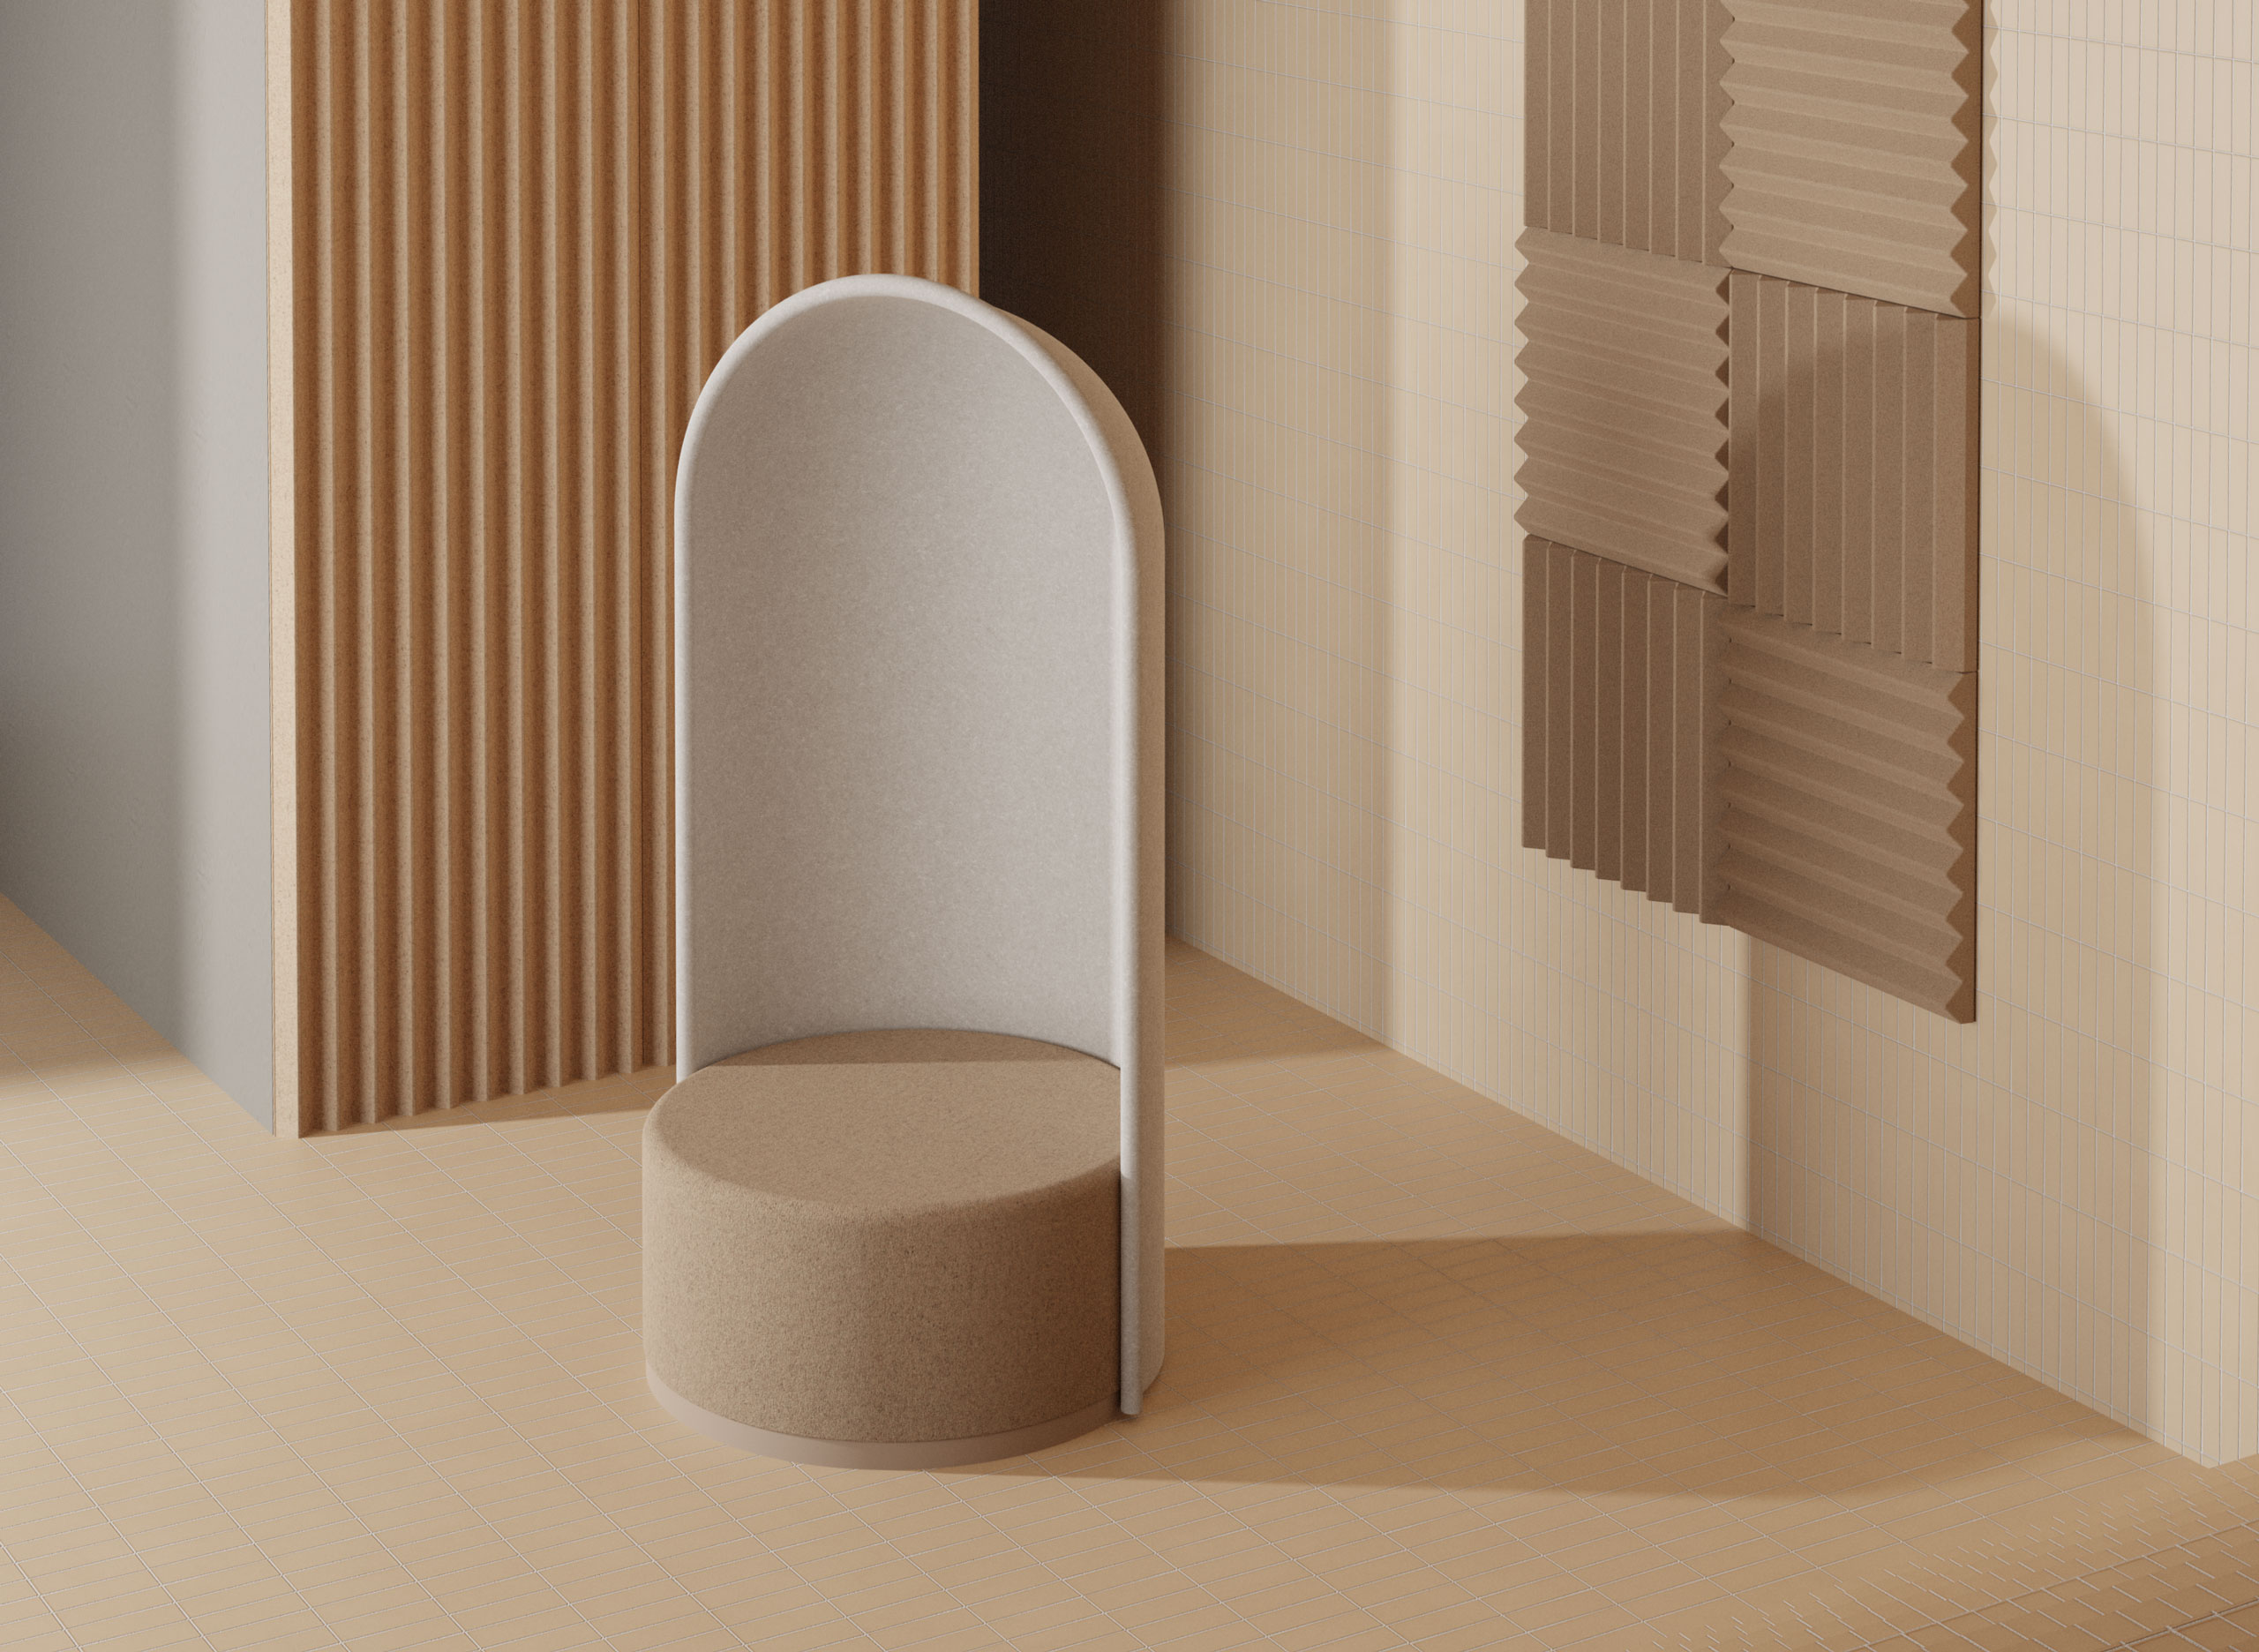 Holvi Chair in light grey and beige seat